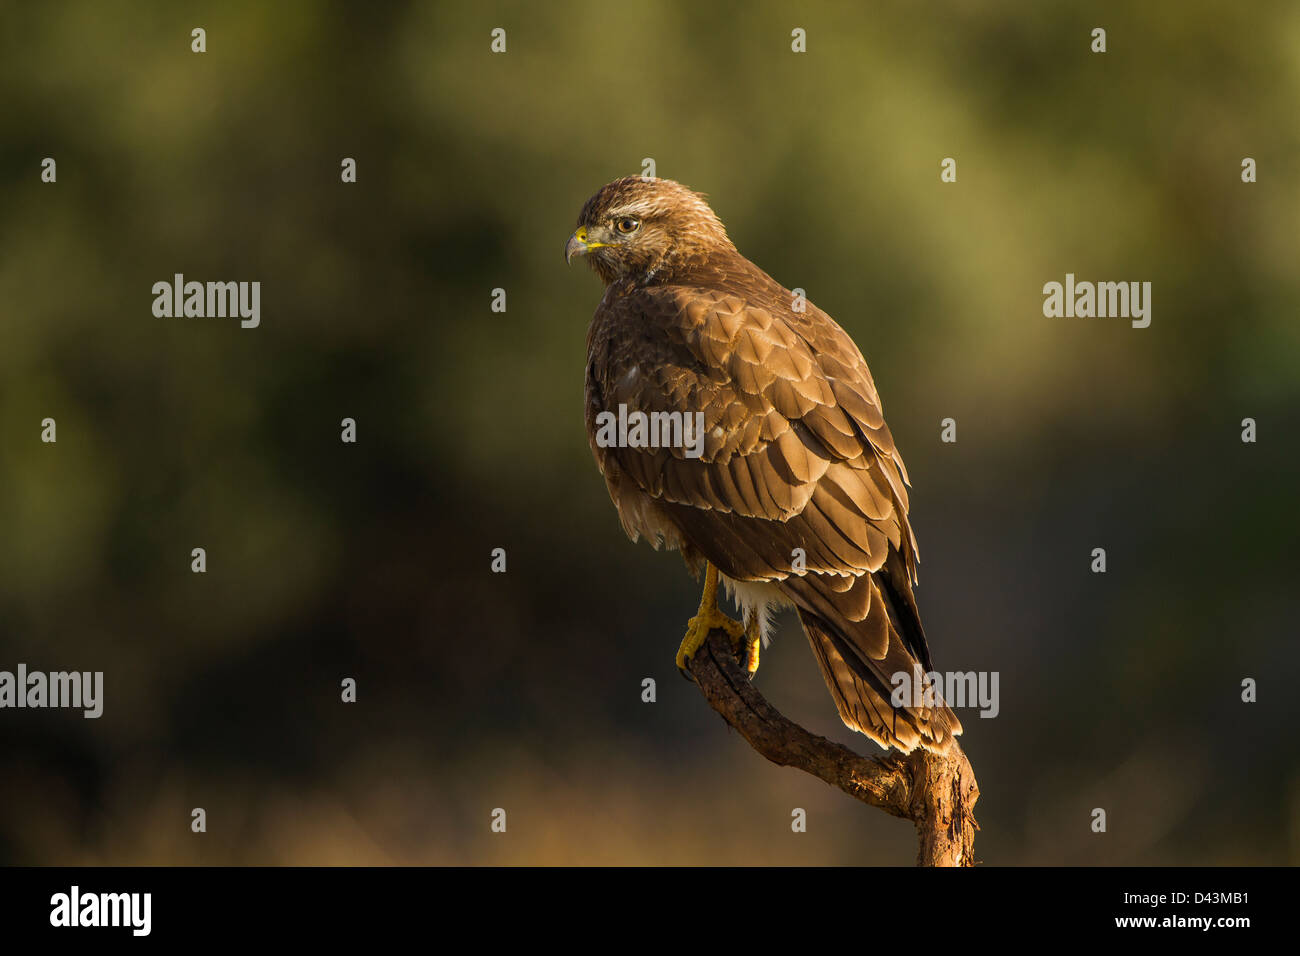 Common buzzard on trunk waiting for a prey Stock Photo